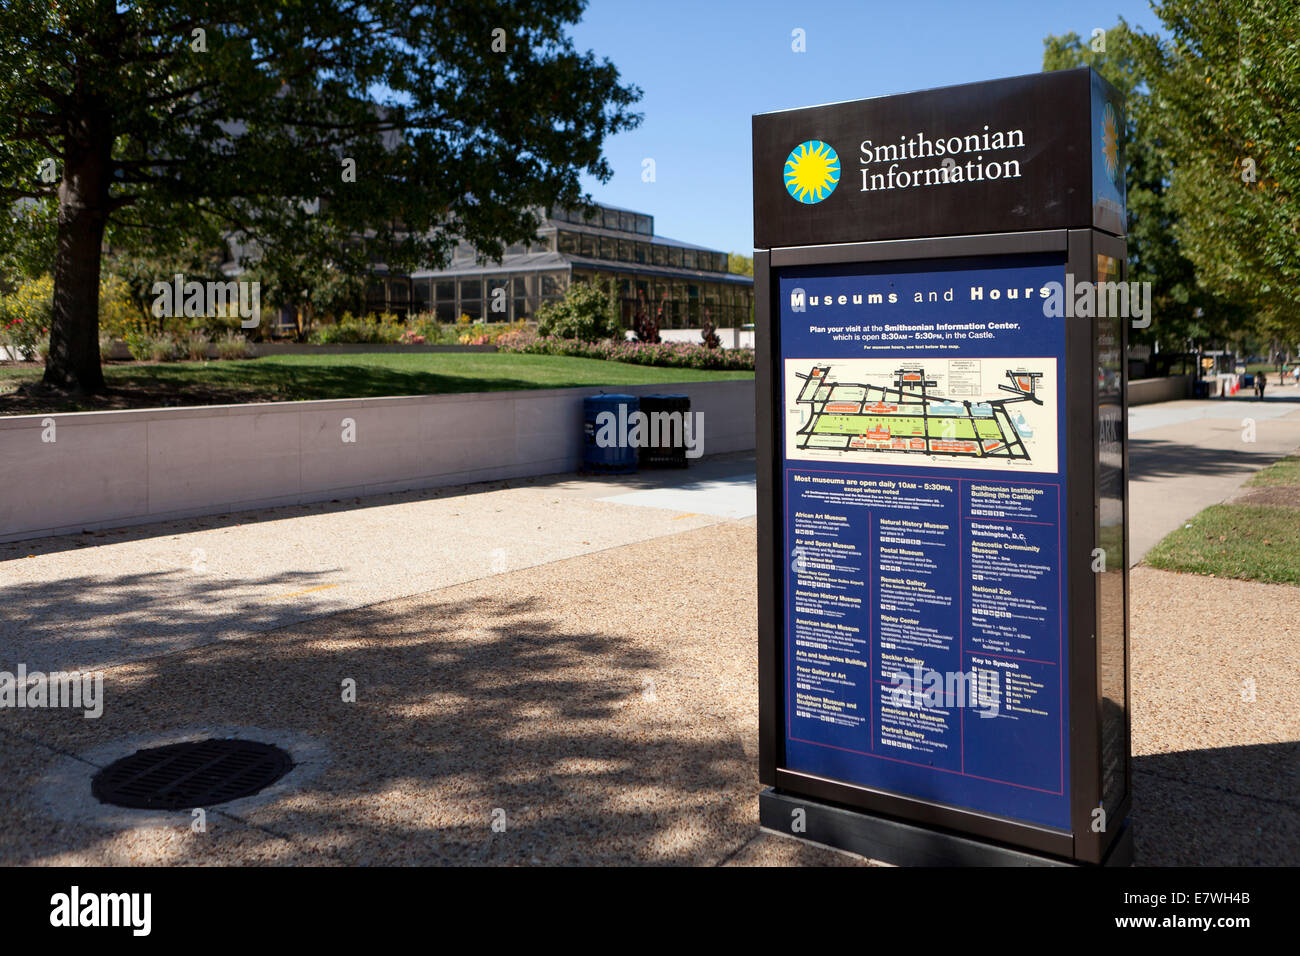 Smithsonian Institution Museum visitor's map and information board - Washington, DC USA Stock Photo